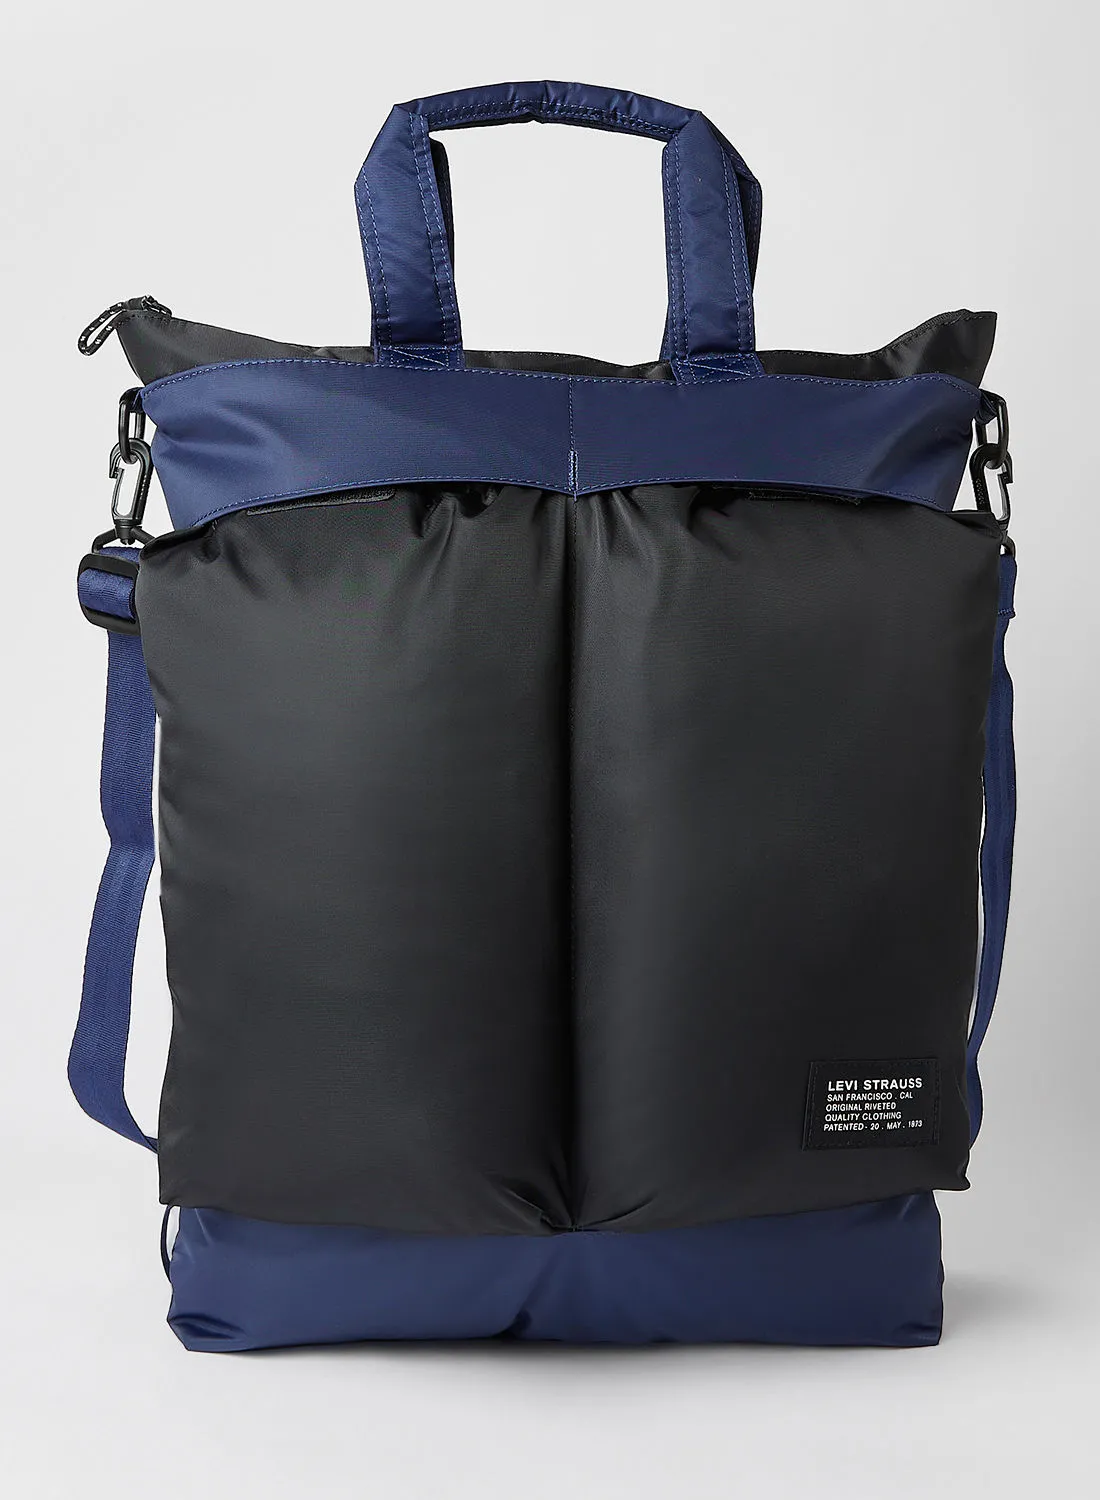 Levi's Convertible Tote Backpack Blue